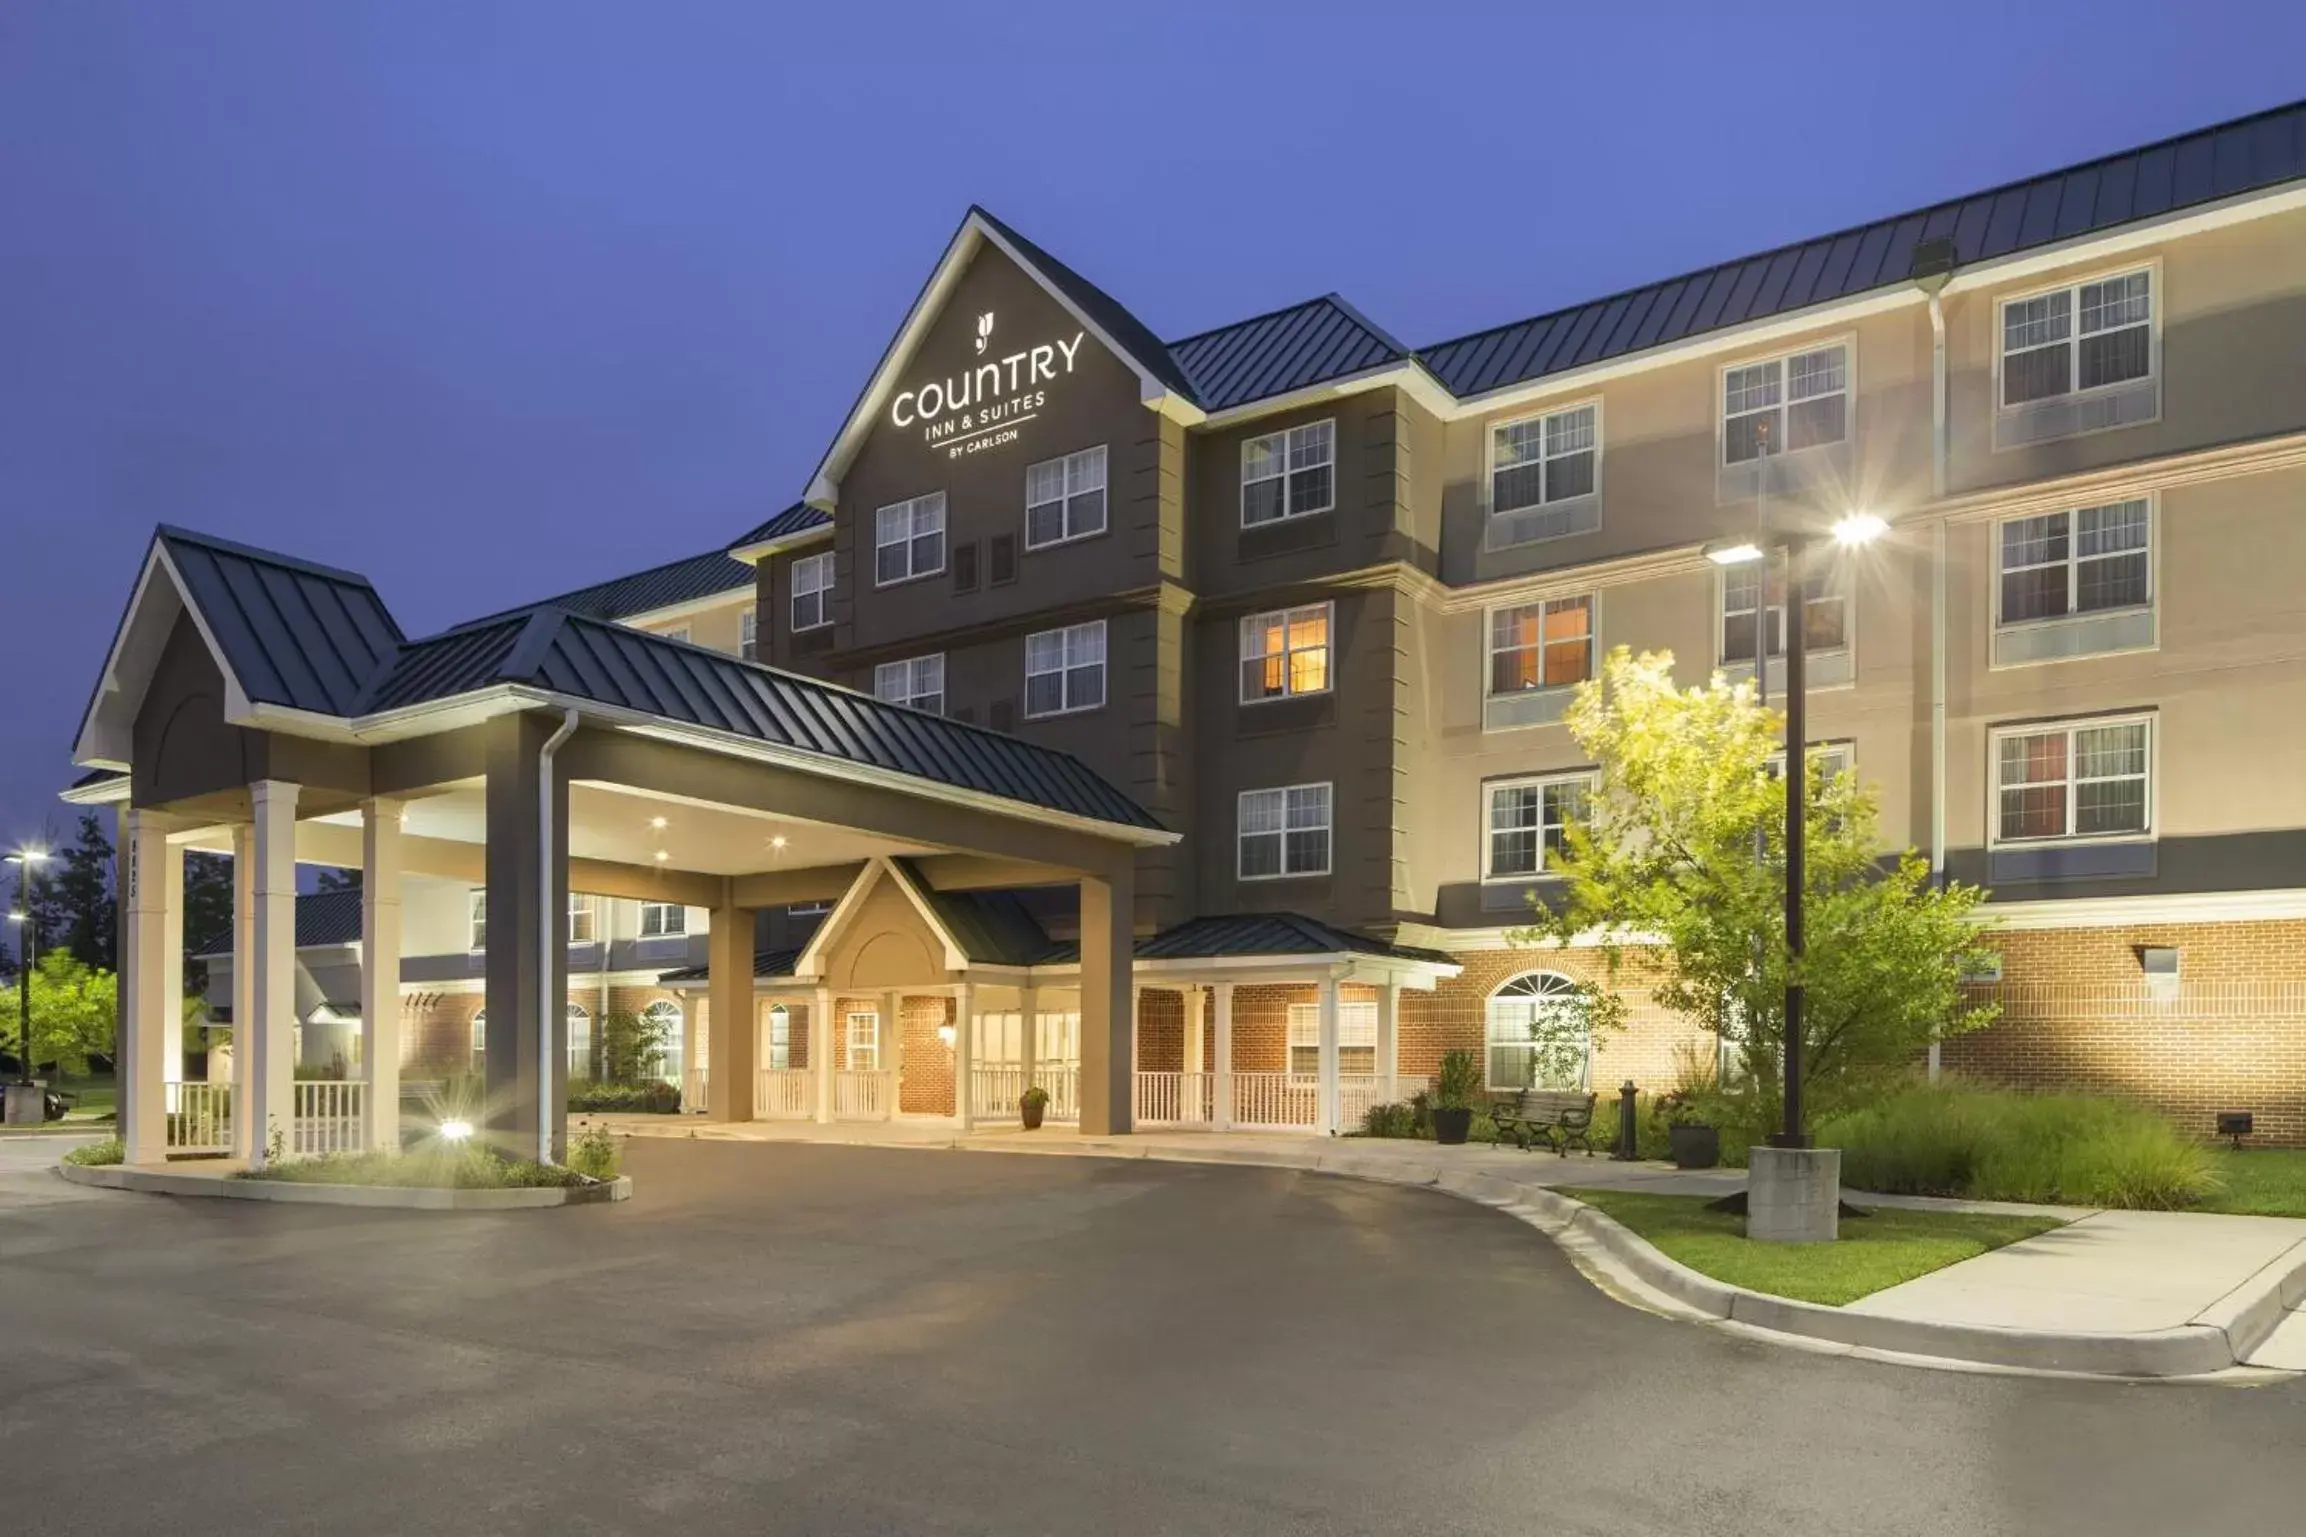 Property Building in Country Inn & Suites by Radisson, Baltimore North, MD